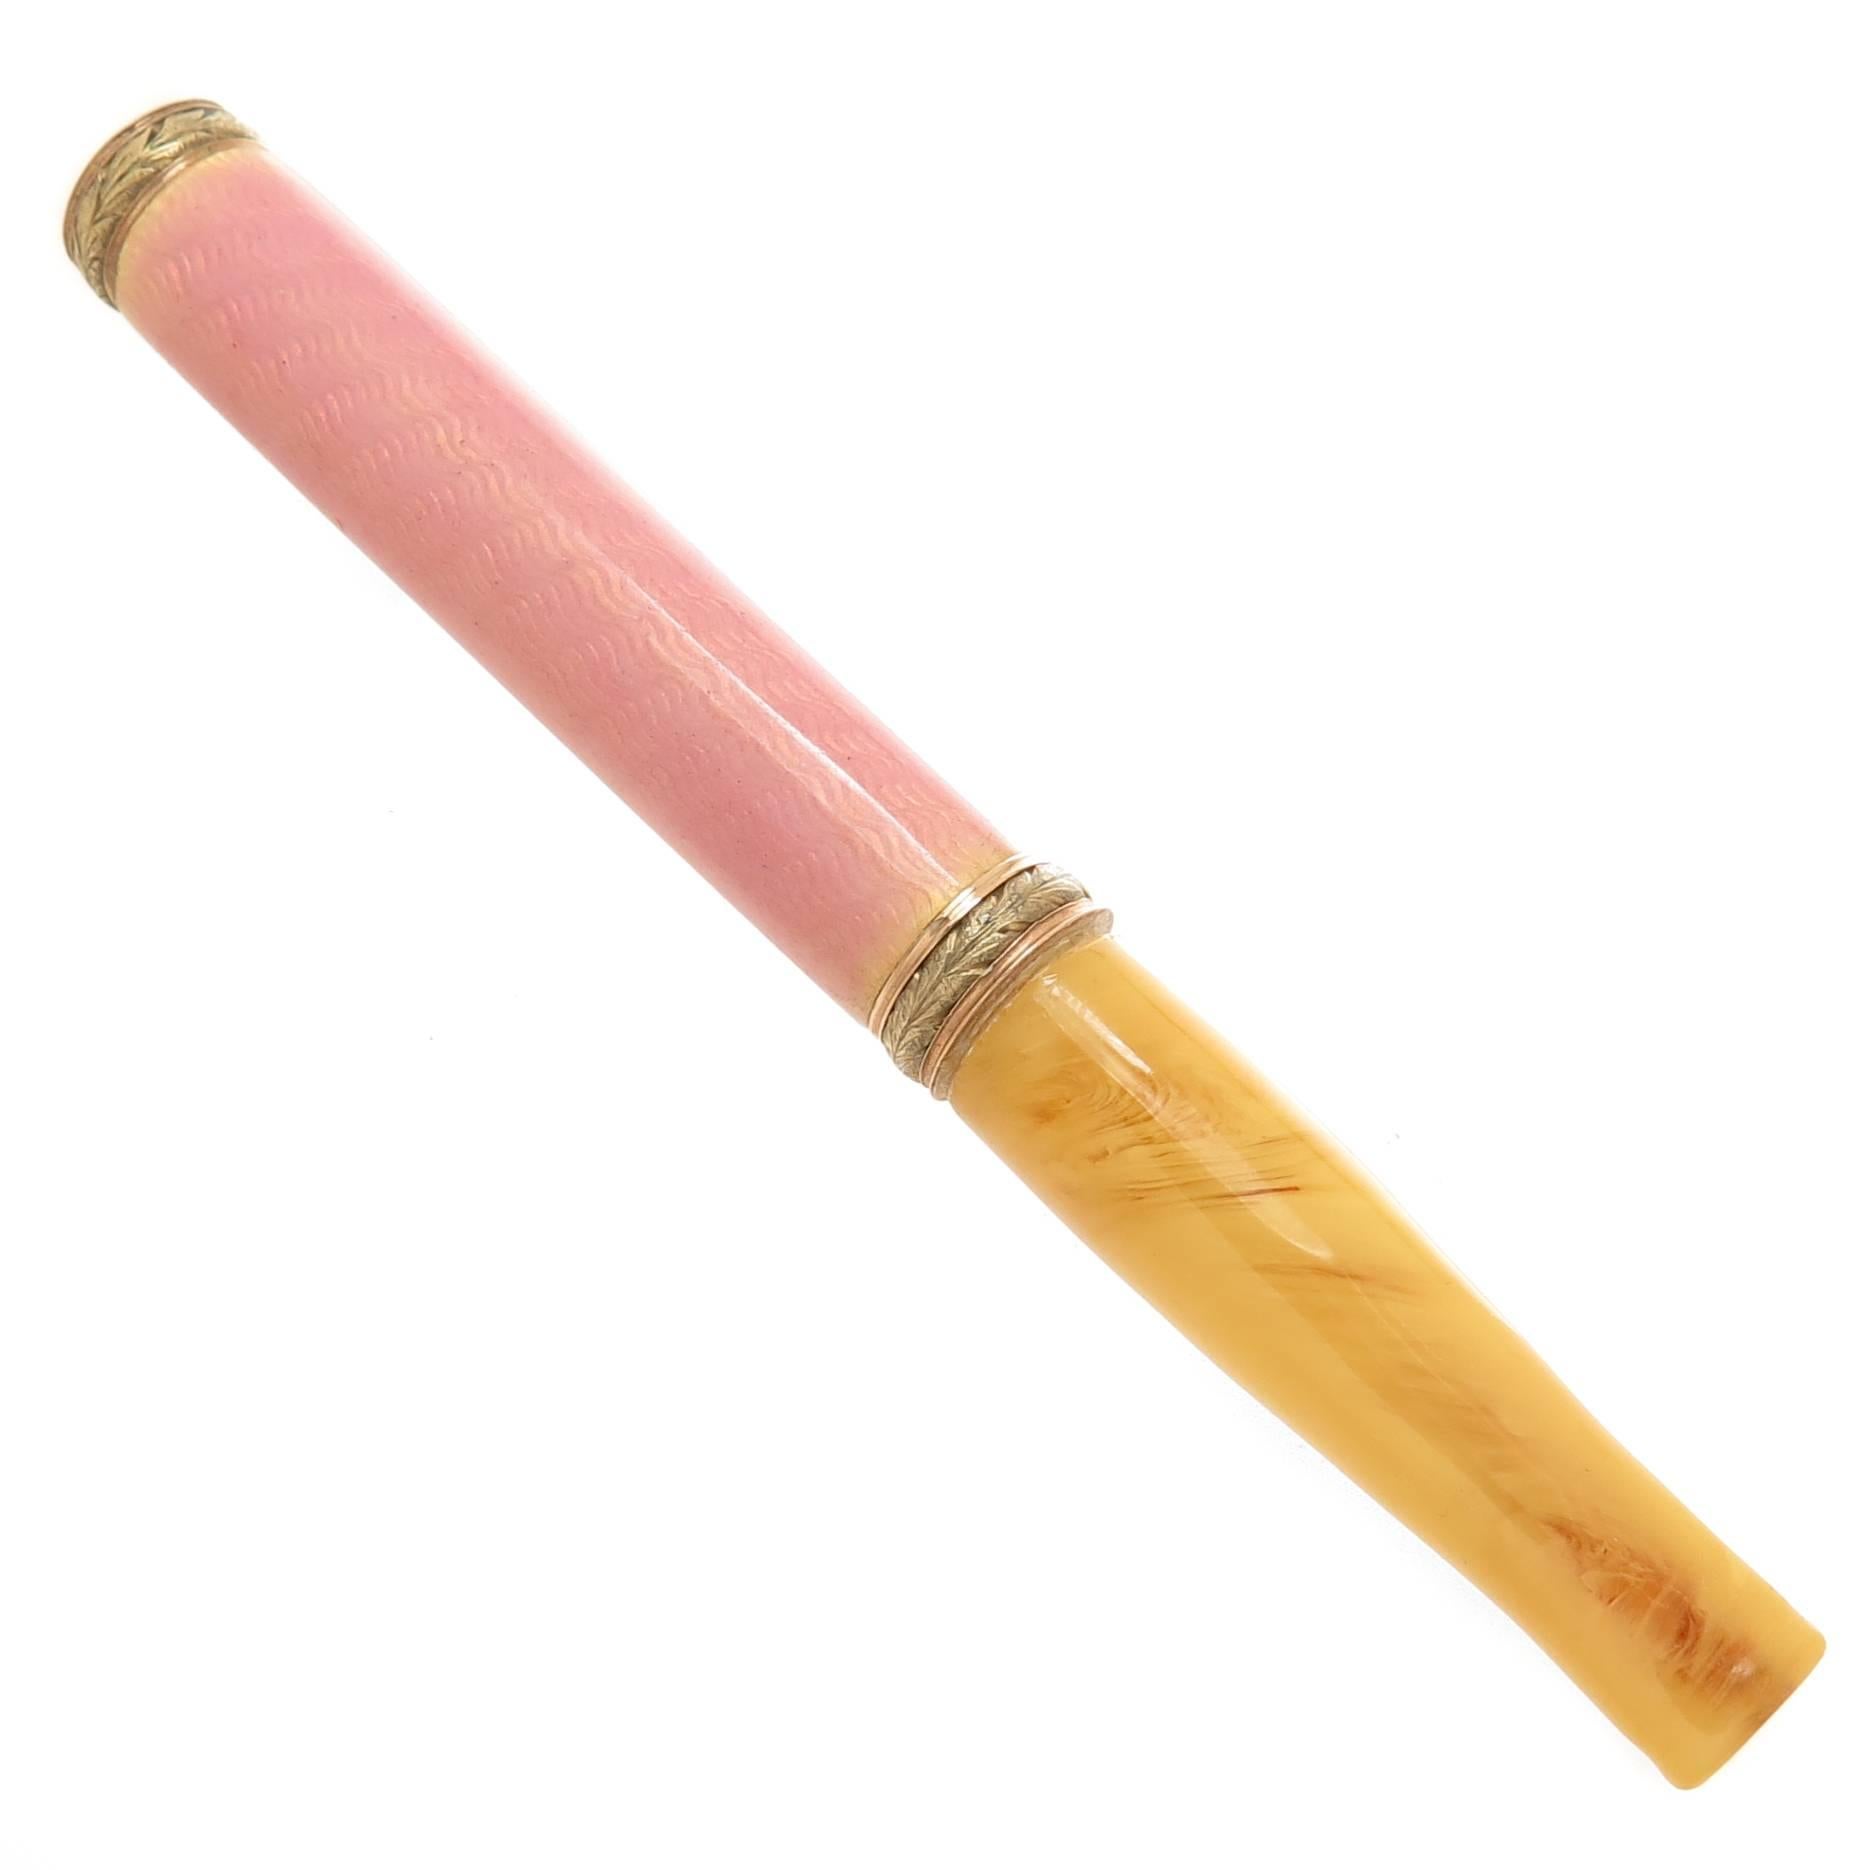 Circa 1900 Faberge Rose and Green Gold Cigarette Holder, measuring 3 1/2 inch in length and 3/8 inch thick, the central section is finished in Pink Guilloche enamel and the Mouth Piece appears to be Amber.  The piece is stamped with work master